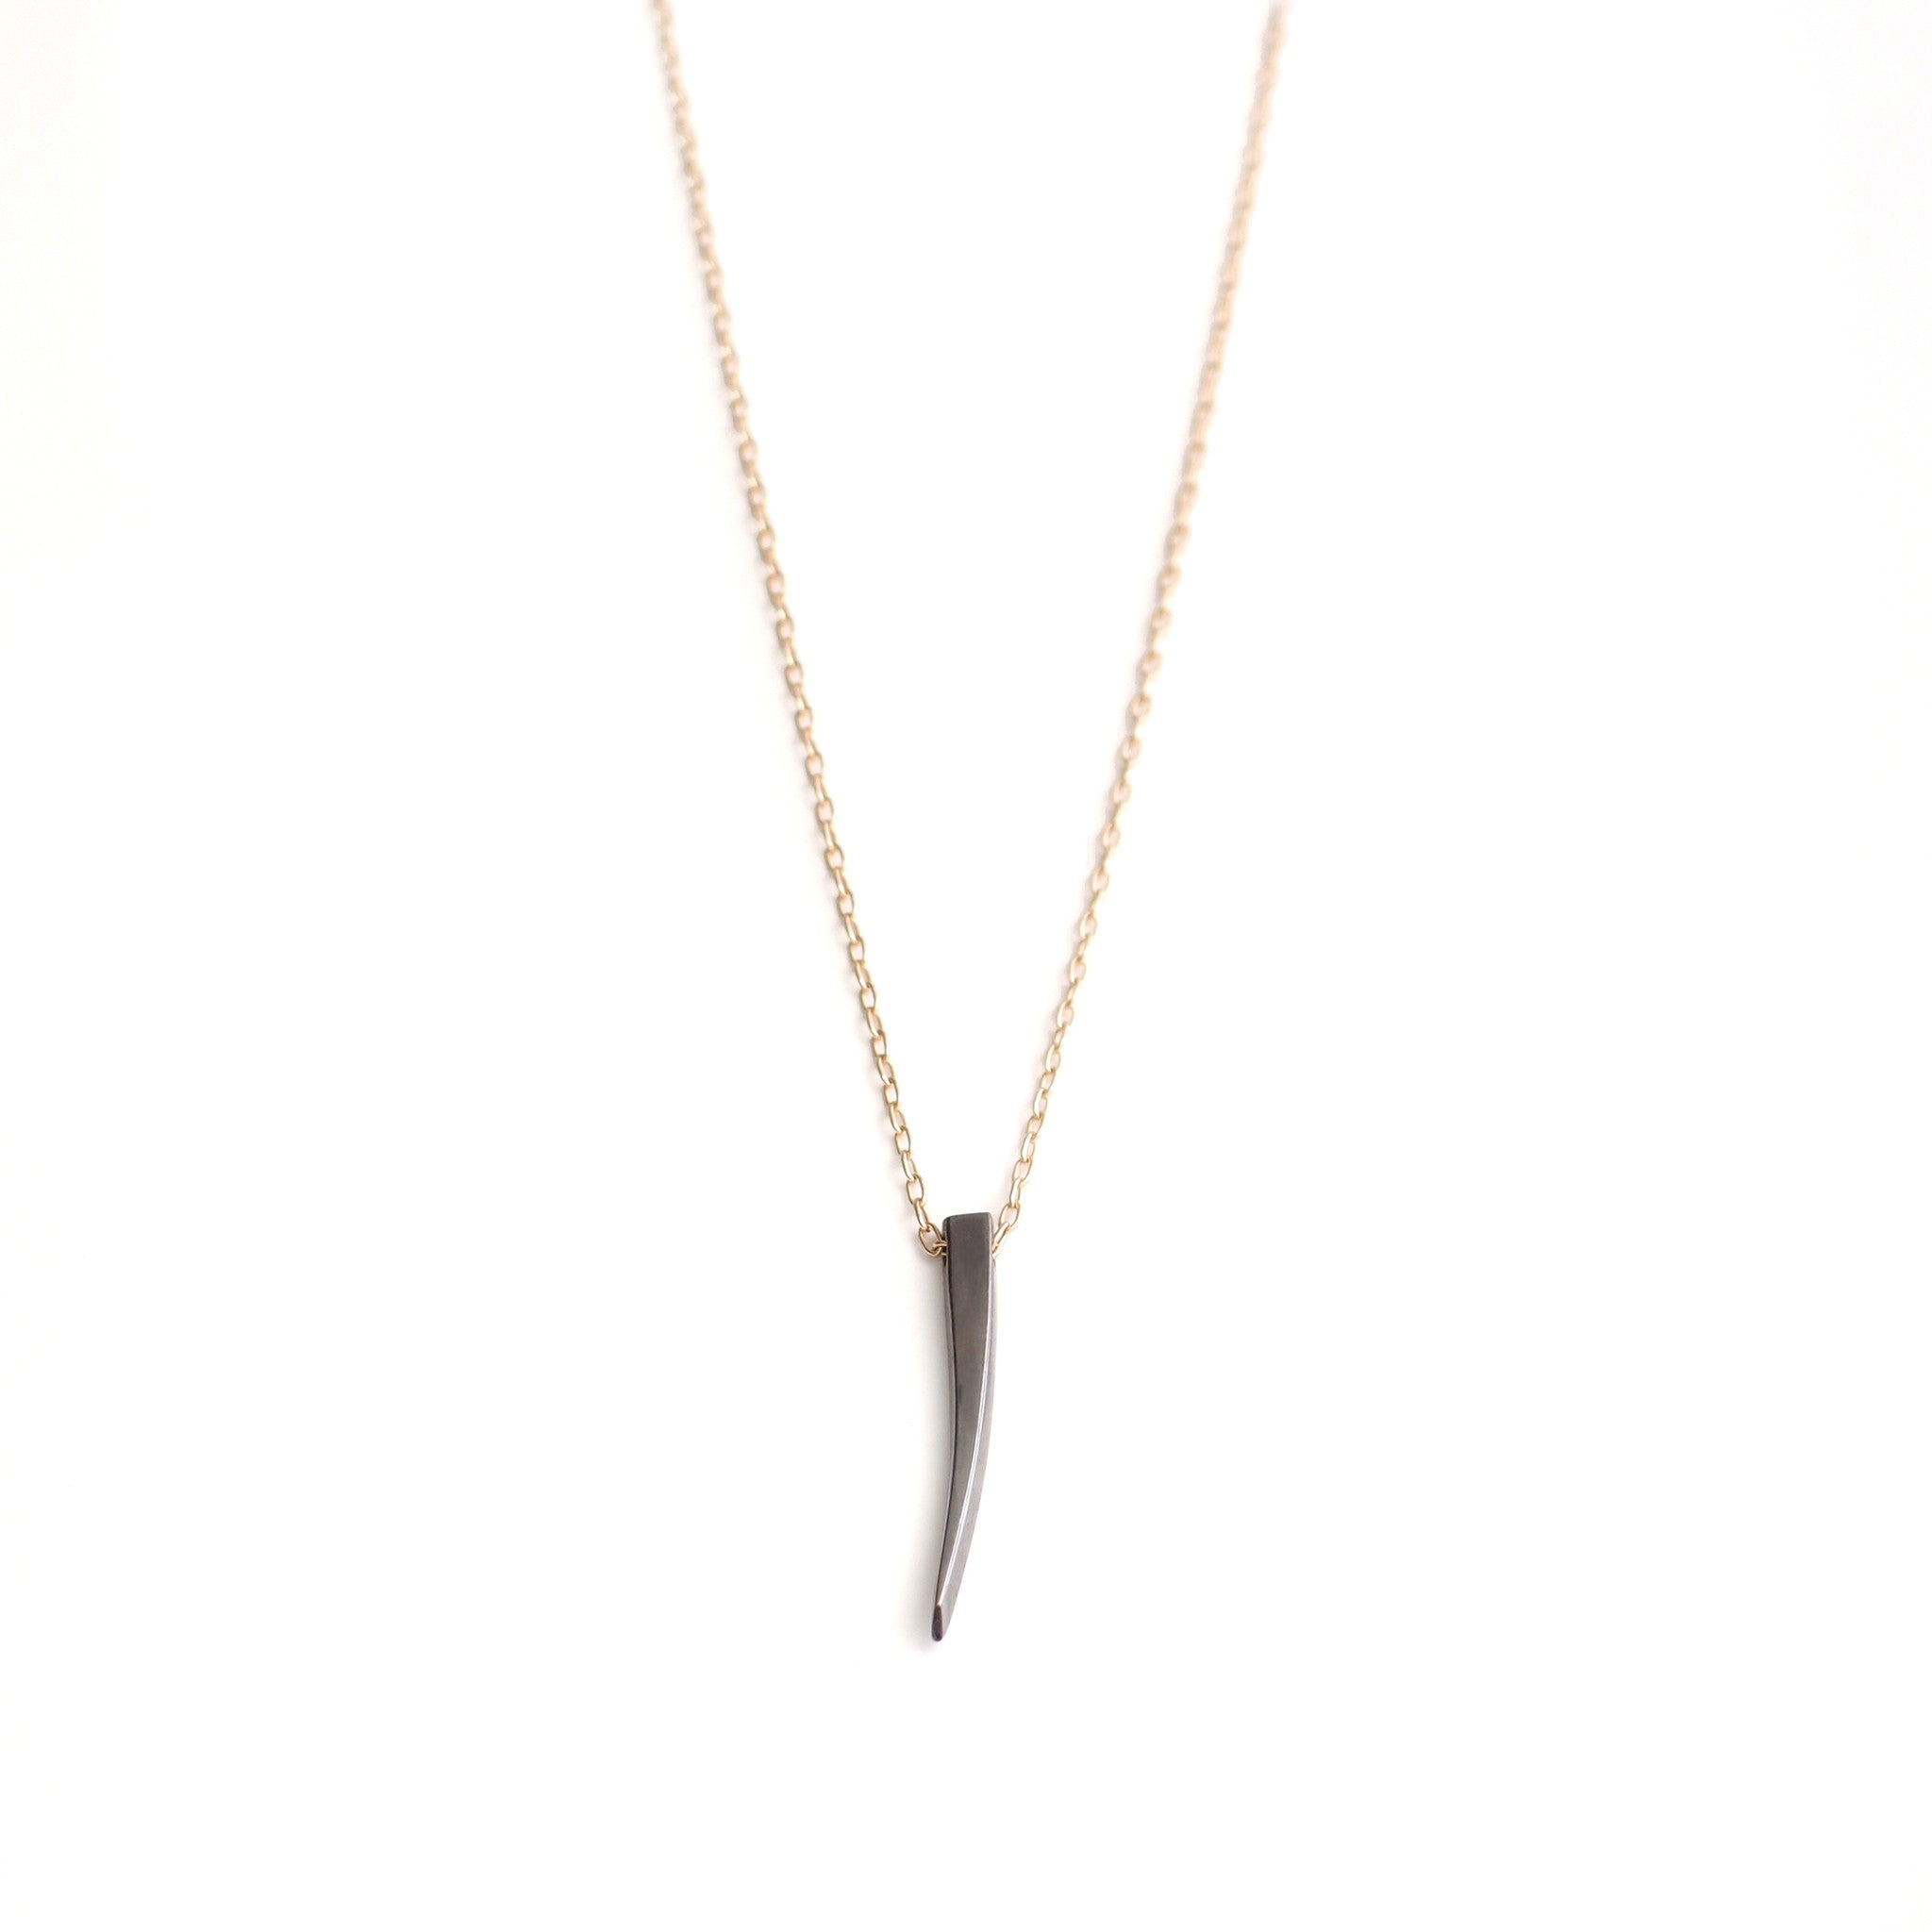 sterling silver plated in black rhodium on a 14k gold chain stake pendant